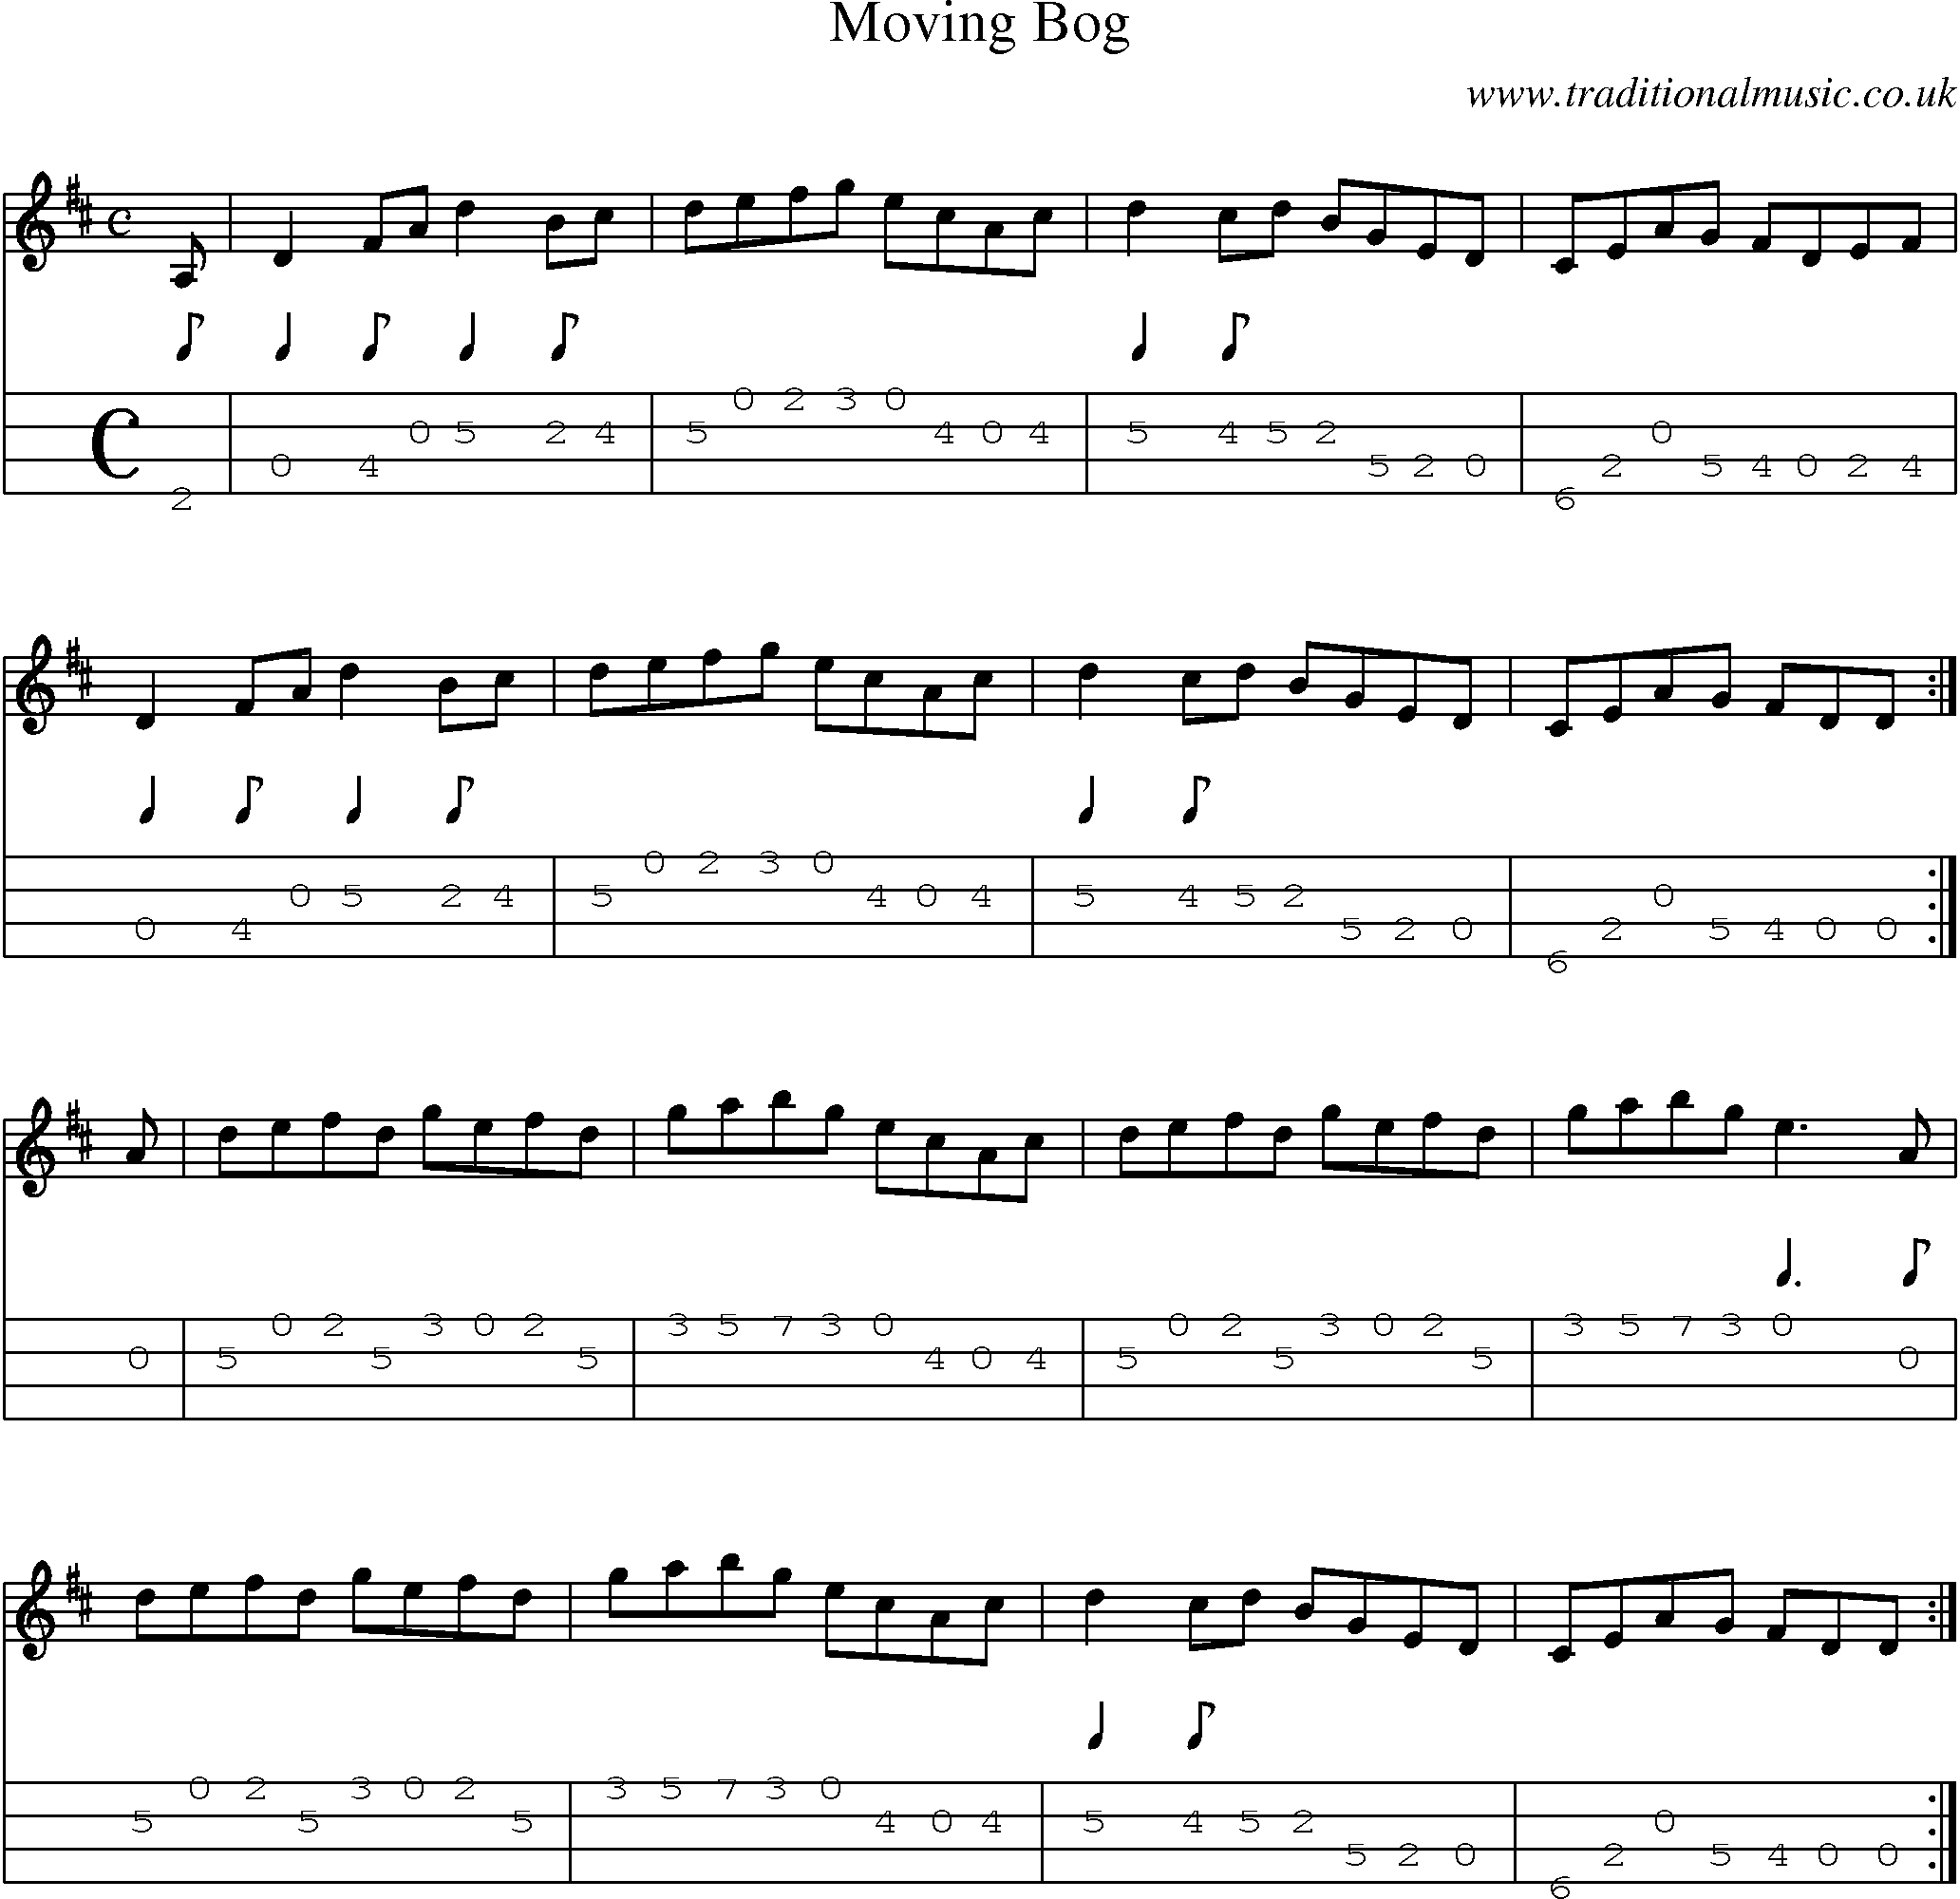 Music Score and Mandolin Tabs for Moving Bog